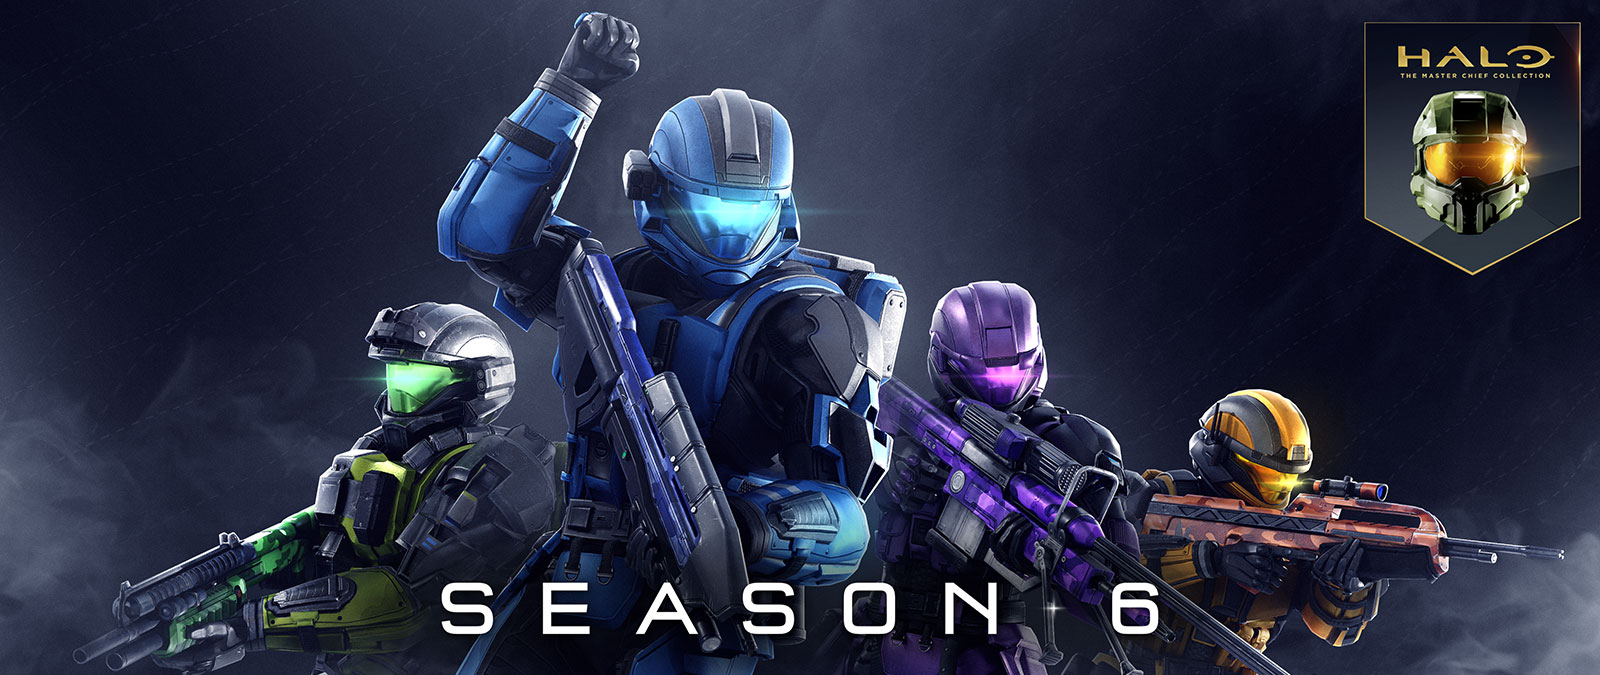 Halo: The Master Chief Collection, Season 6, Spartans in colorful armor pose with guns